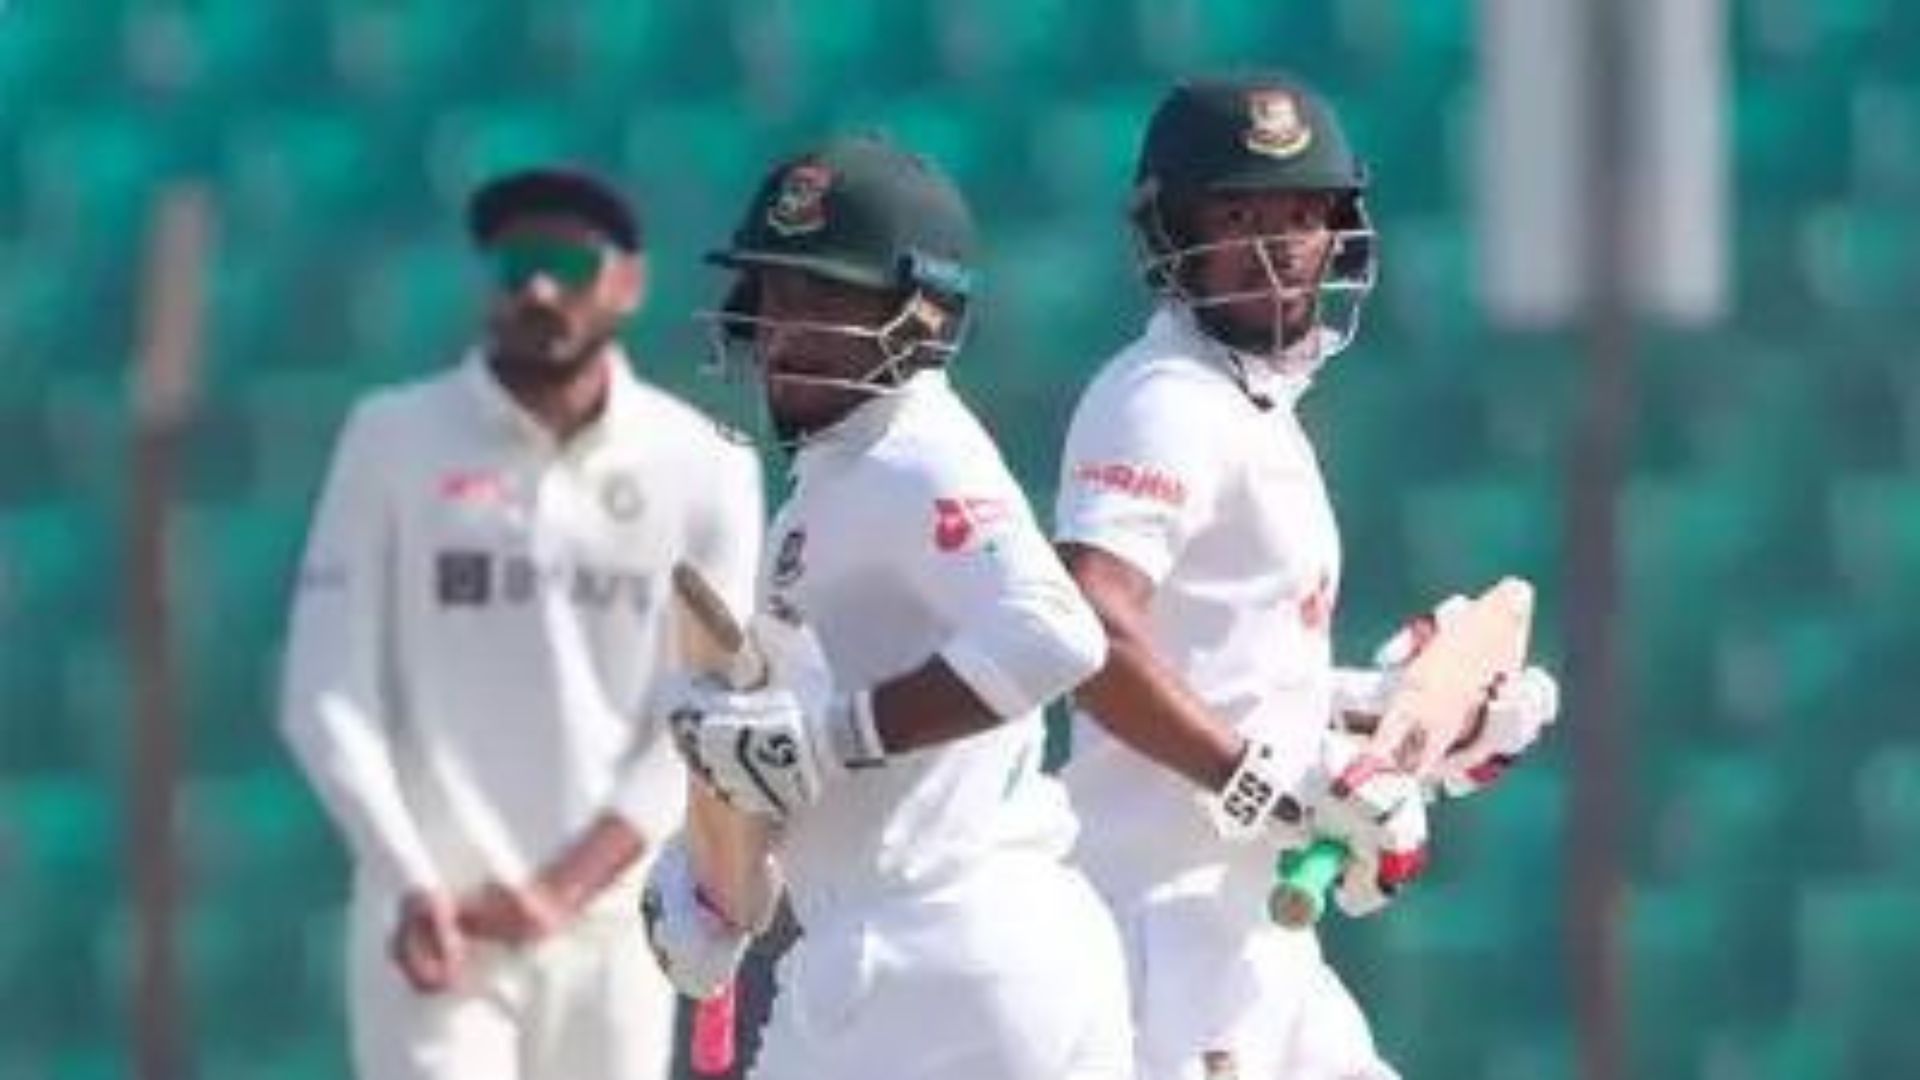 Bangladesh openers Najmul Hossain Shanto and Zakir Hasan provided an excellent platform in the second innings. (P.C.:Twitter)